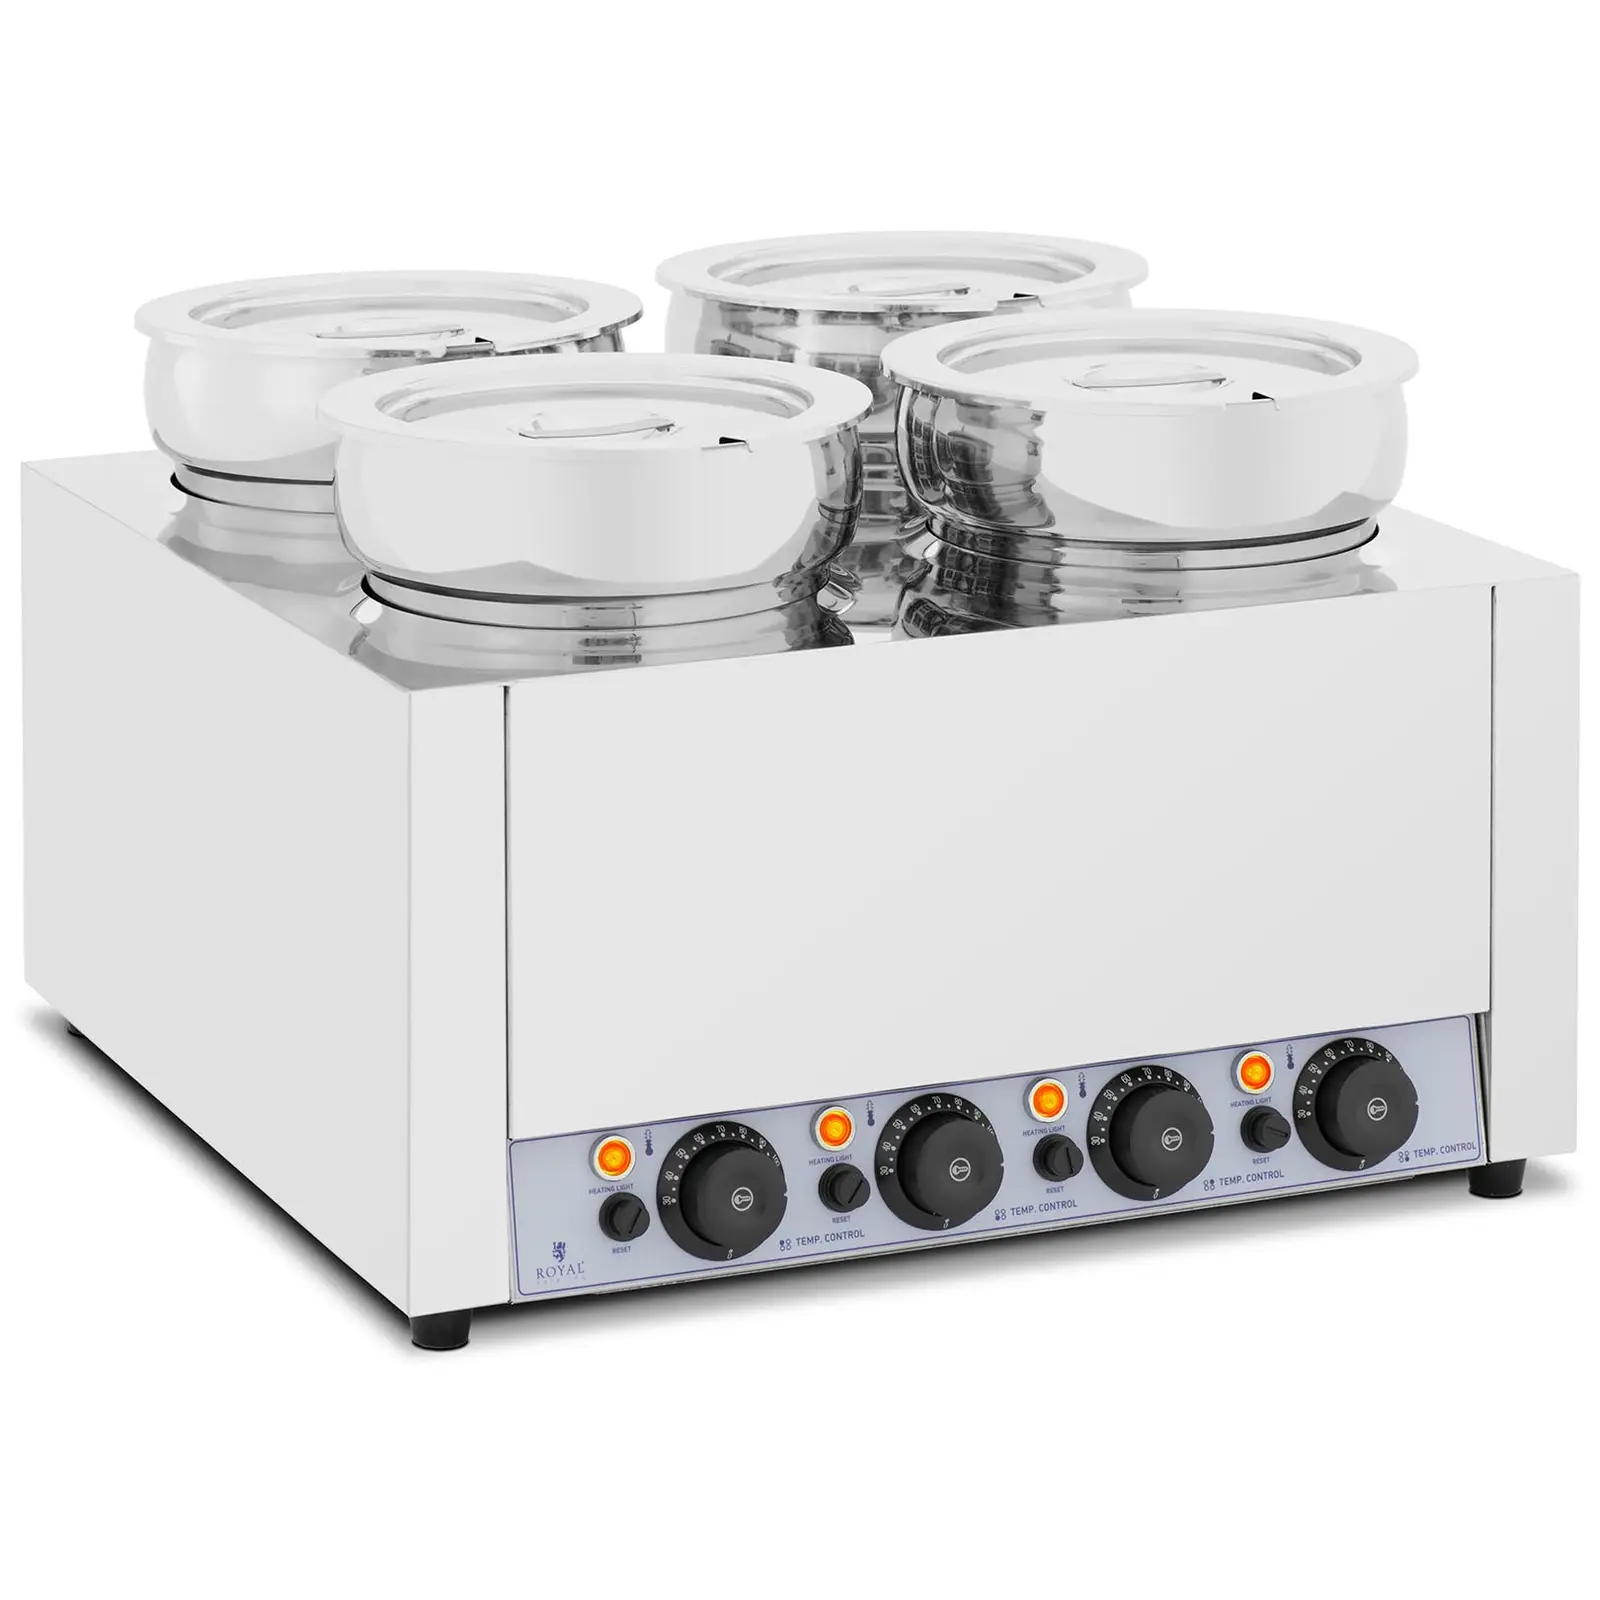 Soup Station - 4 x 7 L - 2000 W - glossy - Royal Catering